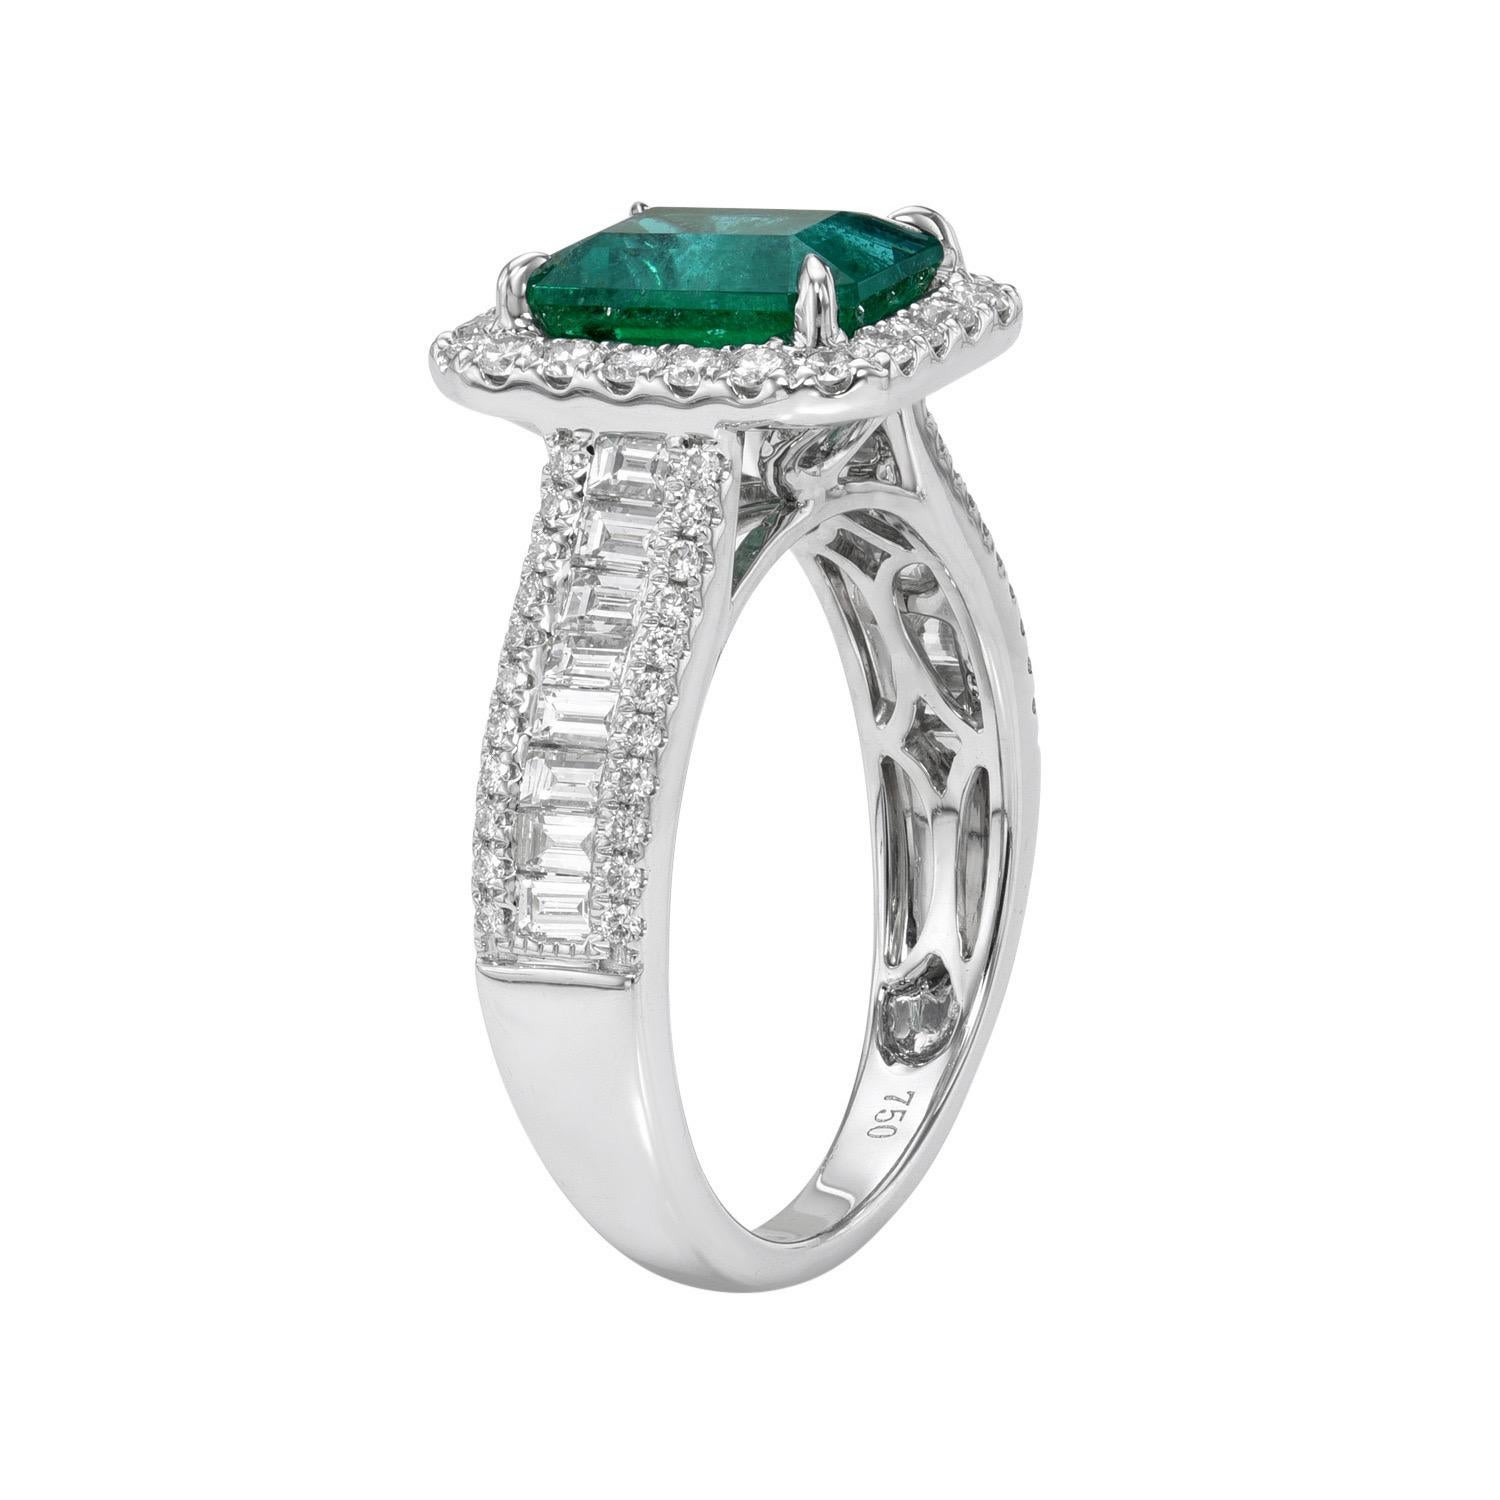 1.96 carat Emerald Cut Emerald, 18K white gold ring, decorated with round brilliant and baguette diamonds, F-G/VS, totaling 0.93 carats.
Ring size 6.5. Resizing is complementary upon request.
Returns are accepted and paid by us within 7 days of